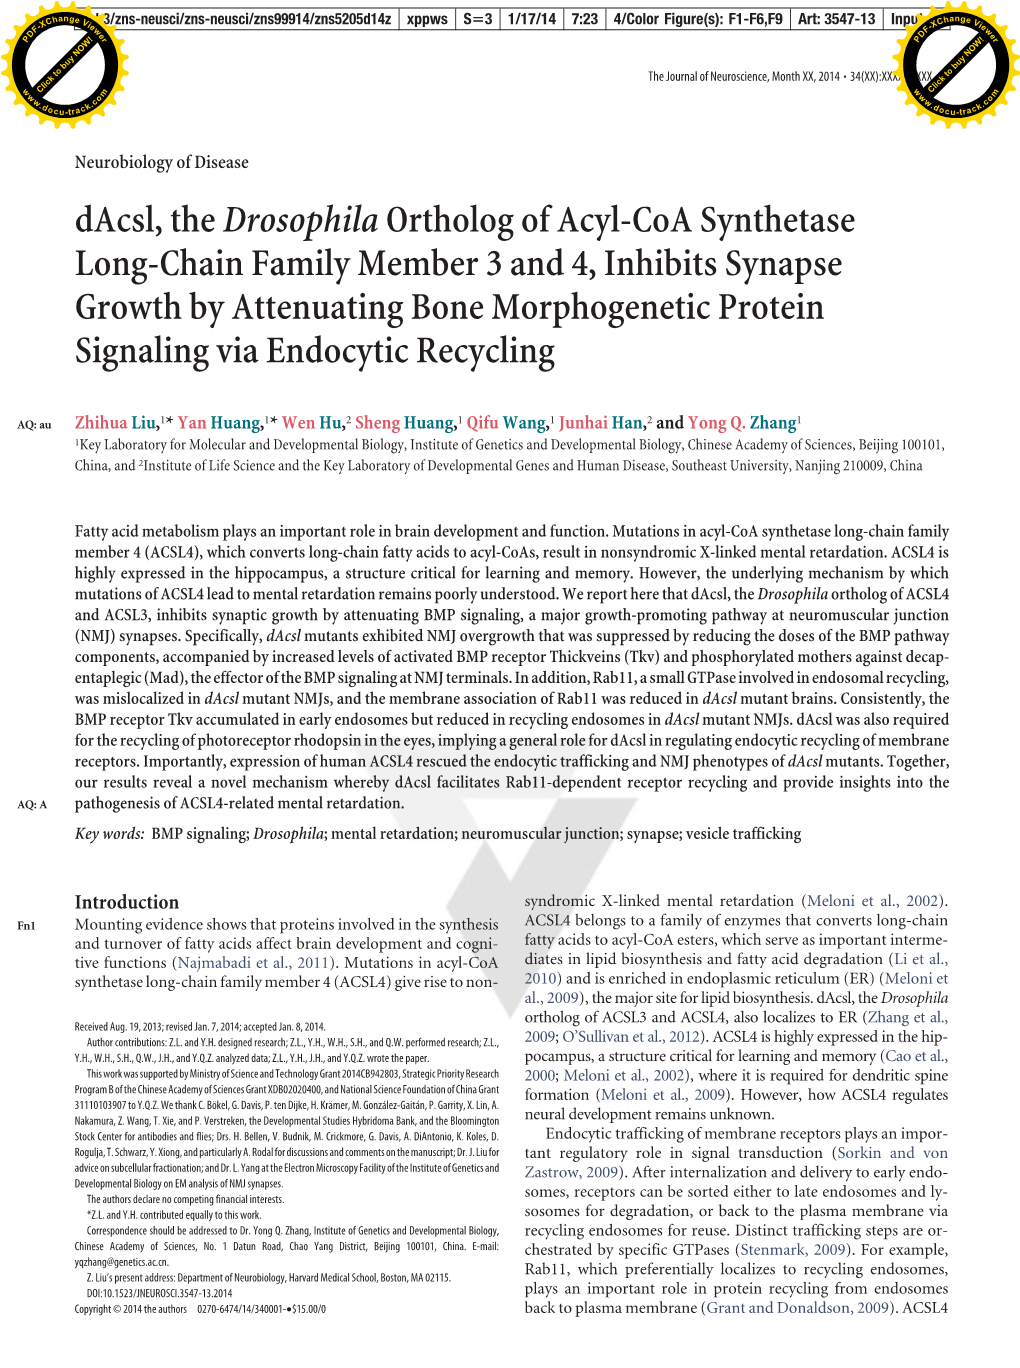 Dacsl, Thedrosophilaortholog of Acyl-Coa Synthetase Long-Chain Family Member 3 and 4, Inhibits Synapse Growth by Attenuating